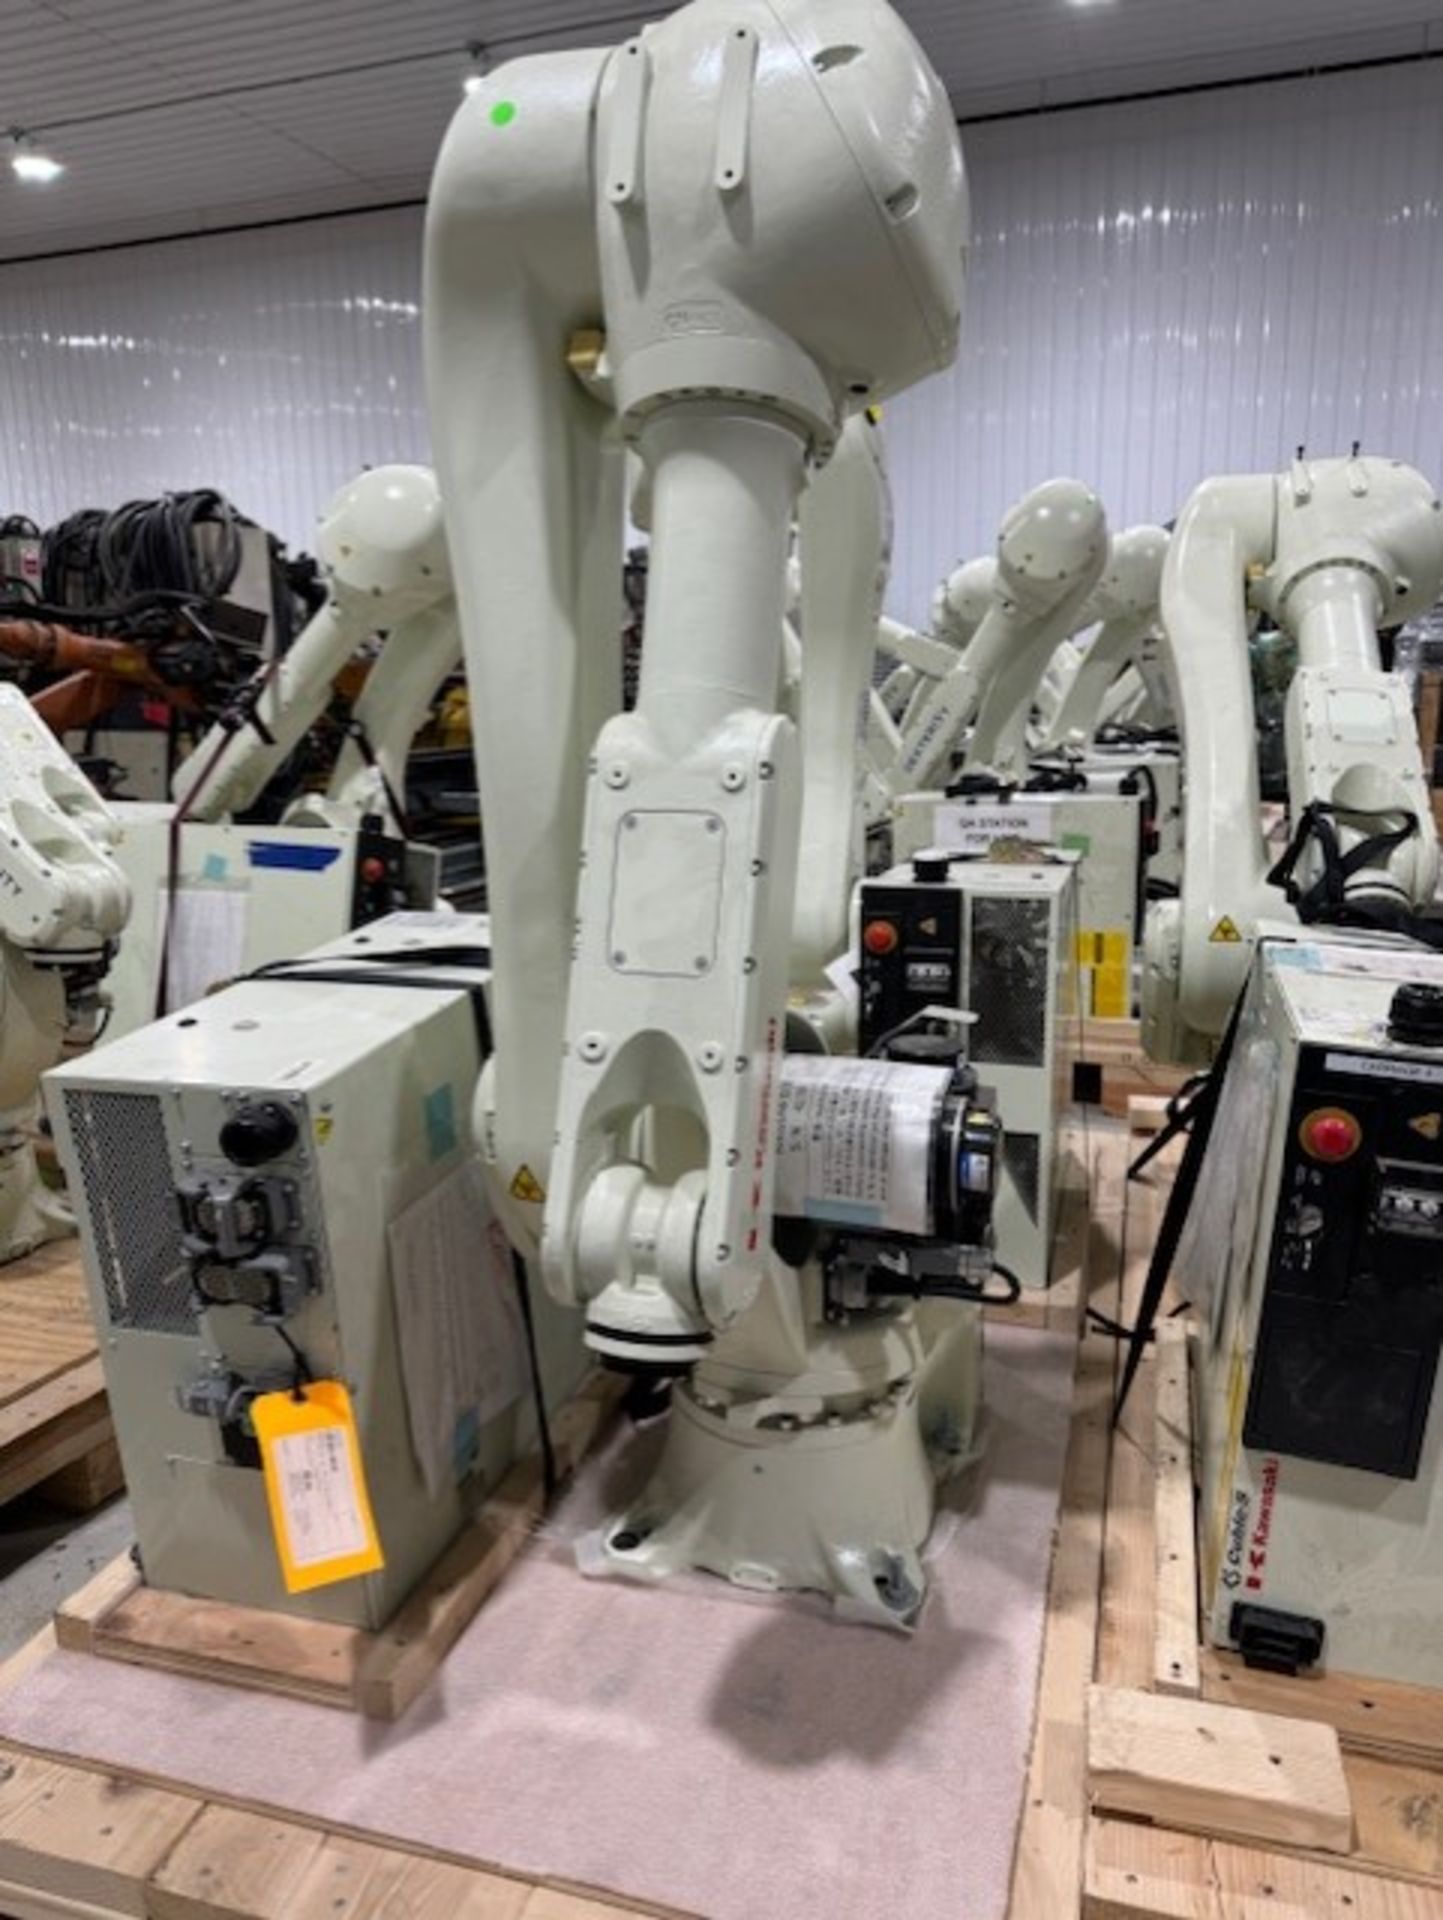 LIGHTLY USED KAWASAKI ROBOT RS020N, SN 4506, 20KG X 1725MM REACH WITH EO1 CONTROLS, CABLES & TEACH - Image 2 of 7